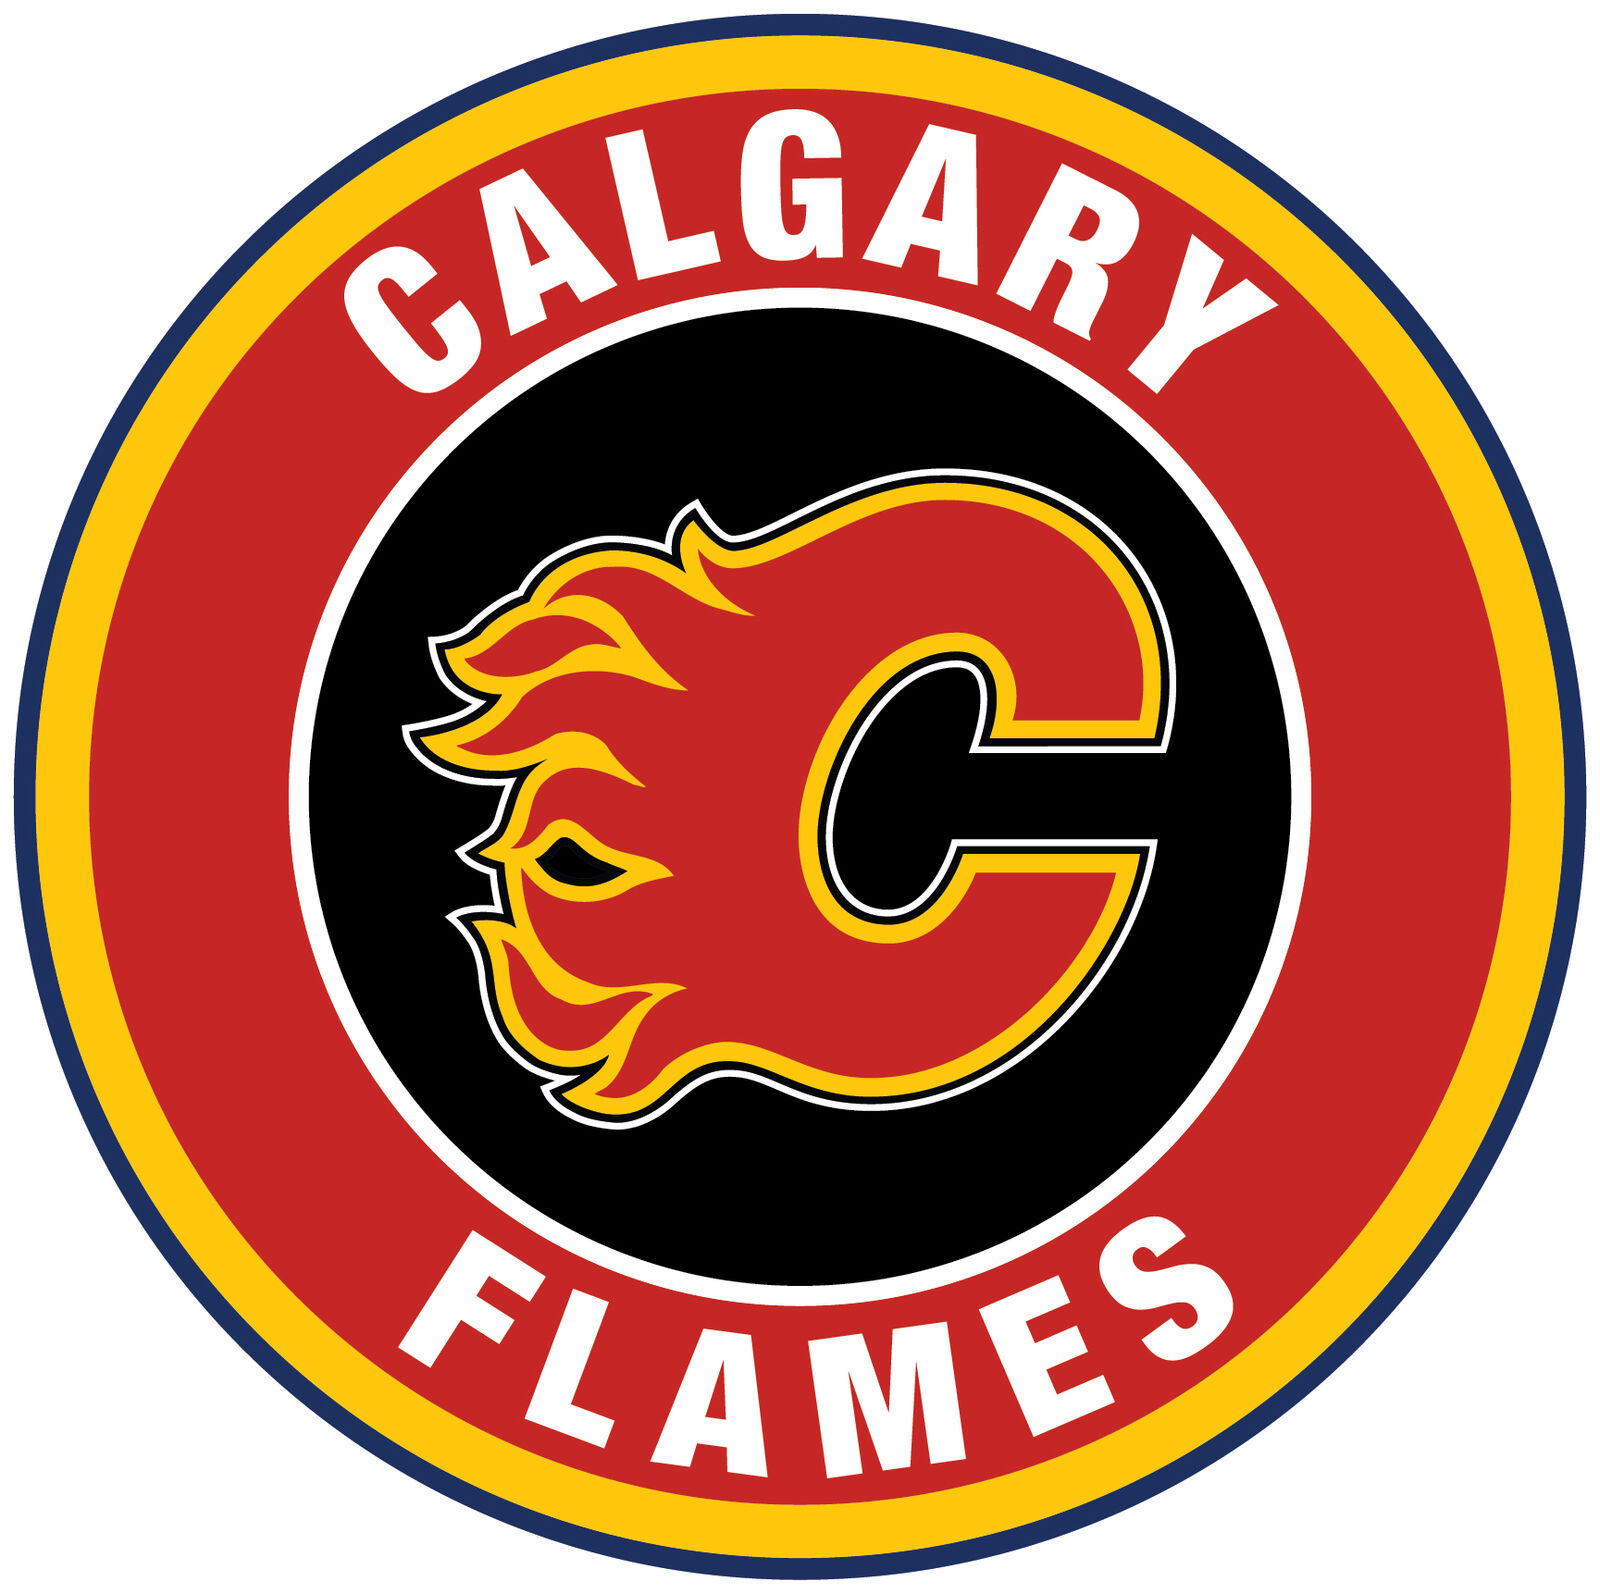 Calgary Flames Circle Sticker / Vinyl Decal 10 Sizes TRACKING